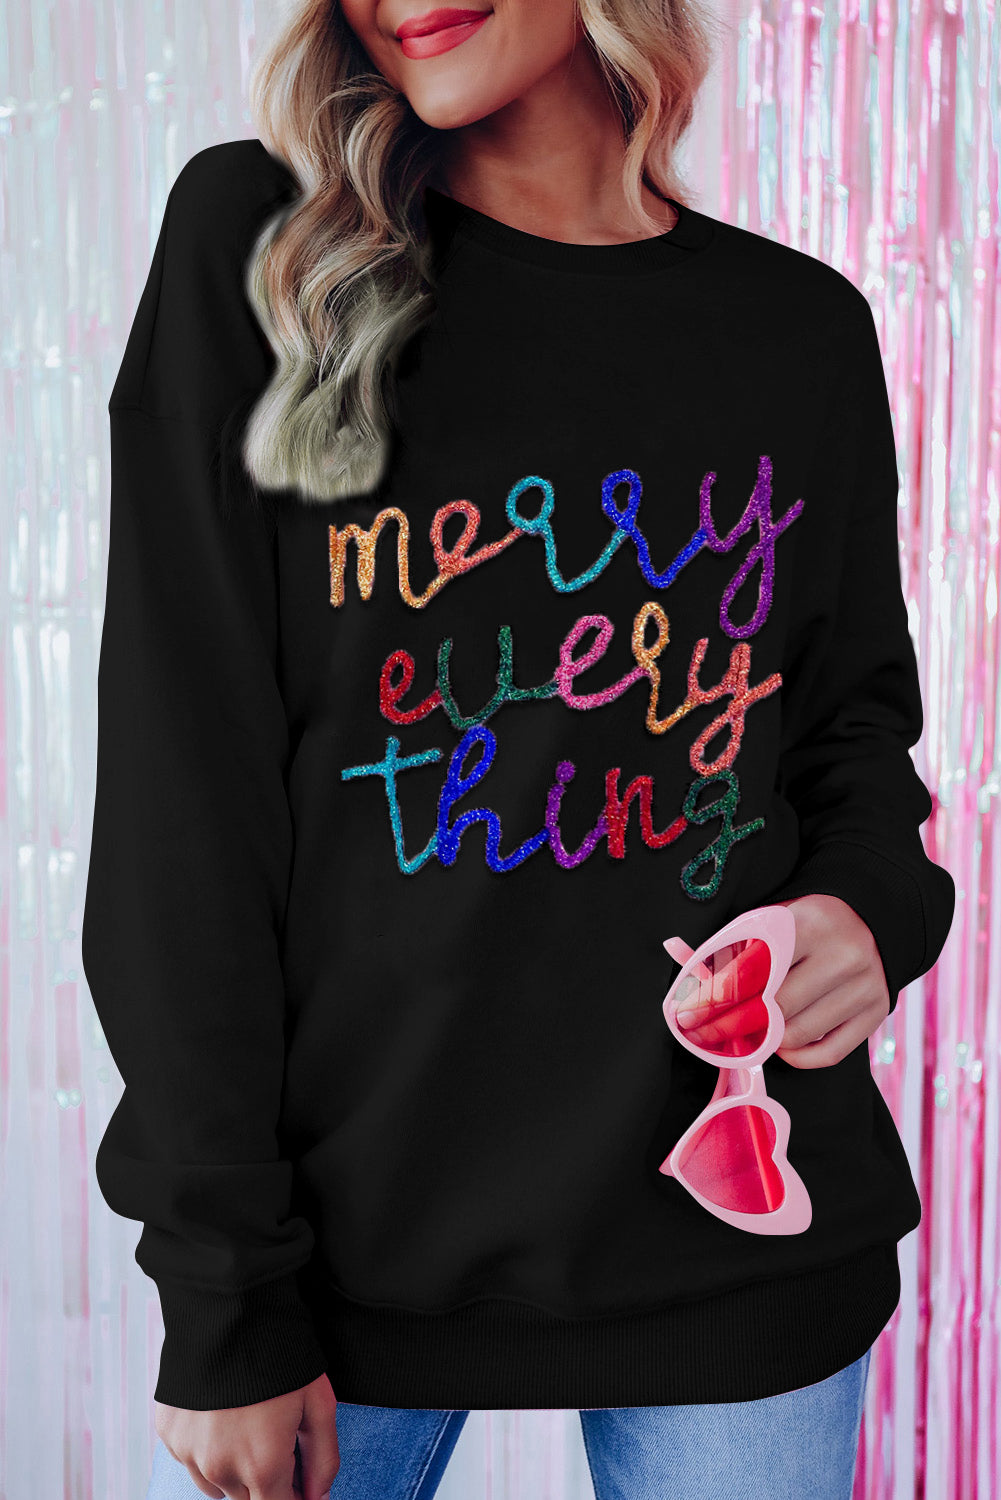 Black1 - Merry Every Thing 100%Polyester - Holly Jolly Round Neck, or Merry & Bright Christmas Sweater, or Other various Fall & Christmas Themed Sweaters - womens sweater at TFC&H Co.